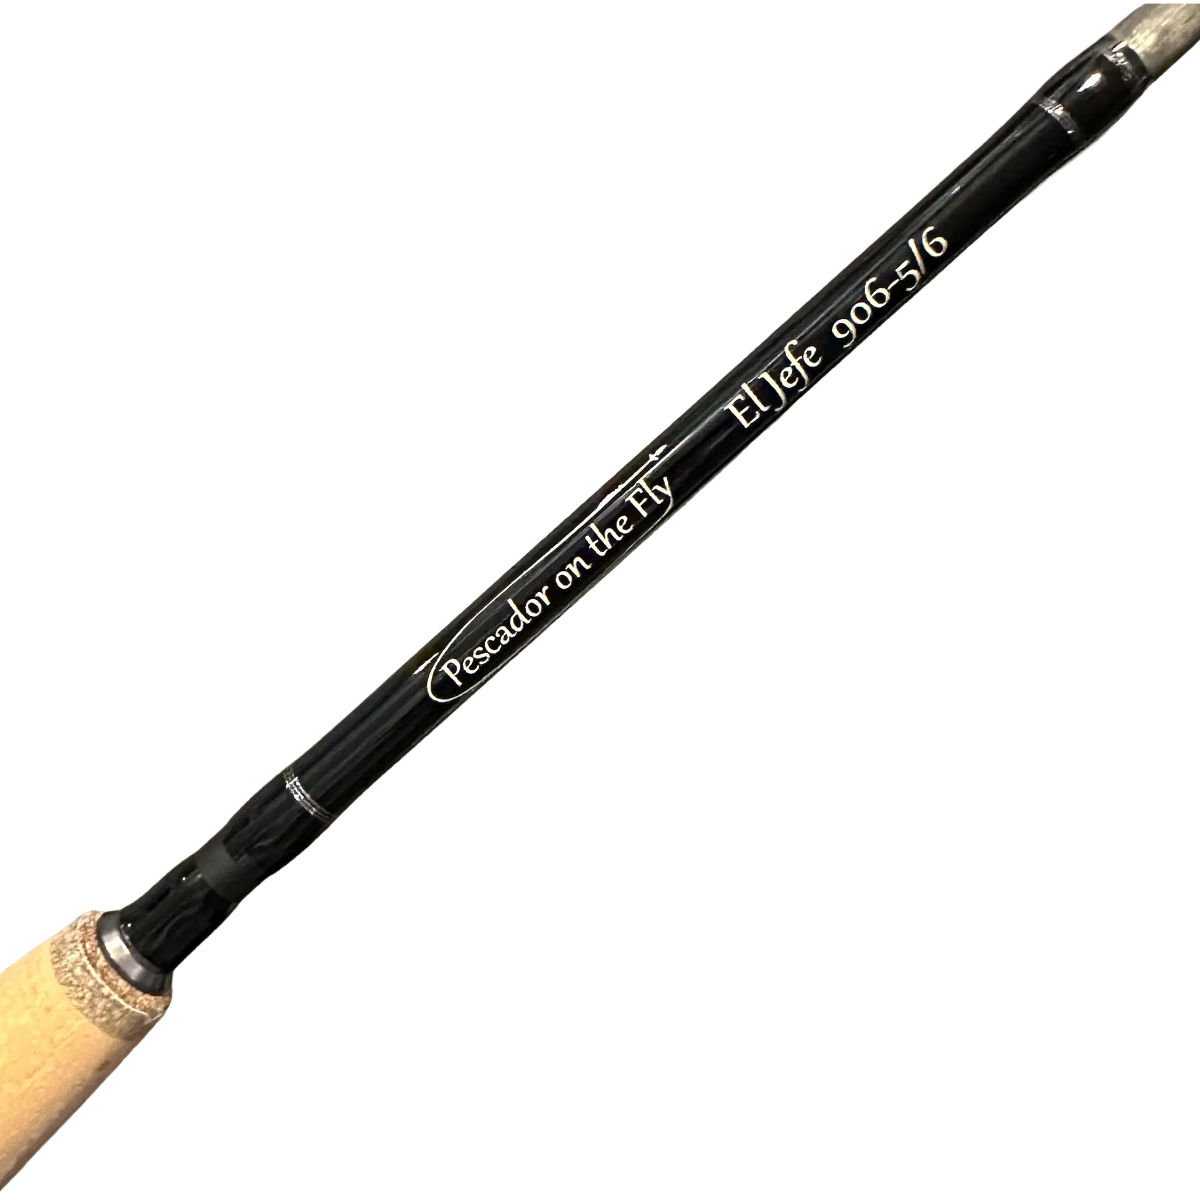 EL JEFE FLY FISHING RODS | 0-10 WEIGHT FLY RODS AVAILABLE | 4 & 6 SECTION PACKABLE FLY RODS | TRAVEL FLY FISHING RODS